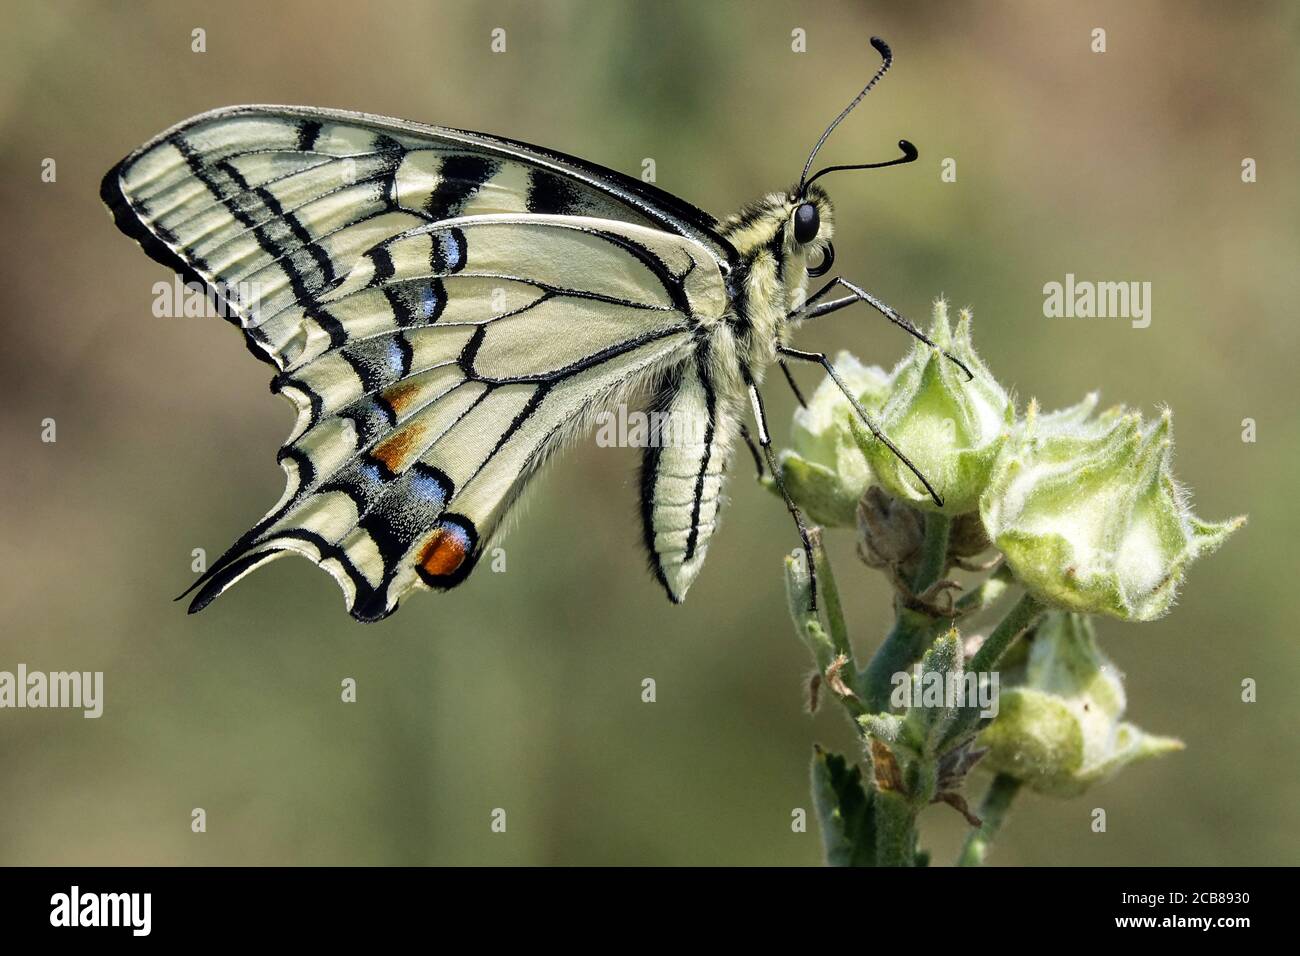 Underside Papilio machaon Old World swallowtail Butterfly on Plant Butterfly on flower Papilio Machaon butterfly Wings closed Butterfly flower closeup Stock Photo